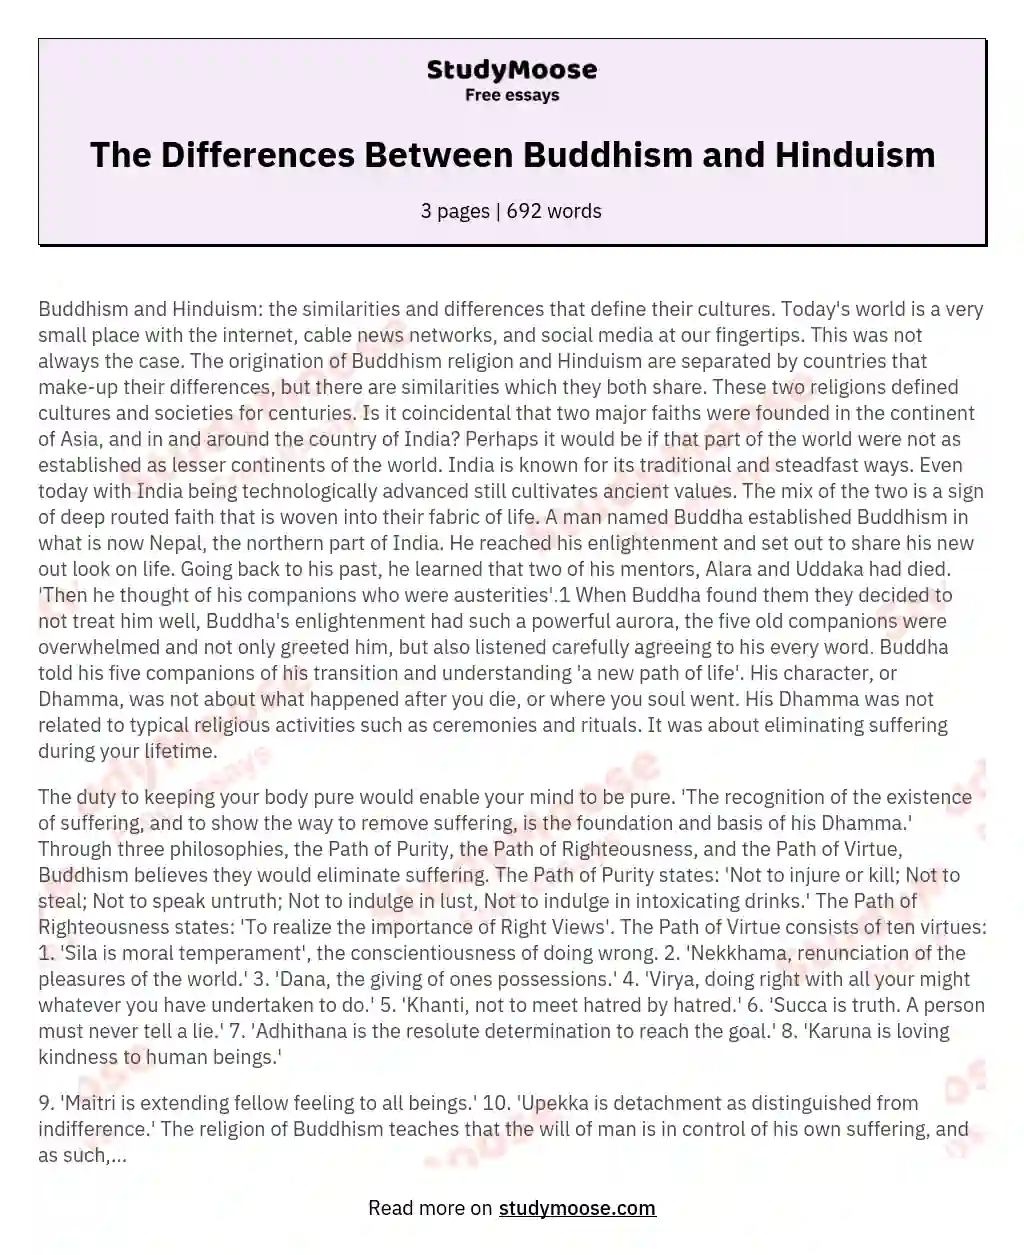 The Differences Between Buddhism and Hinduism